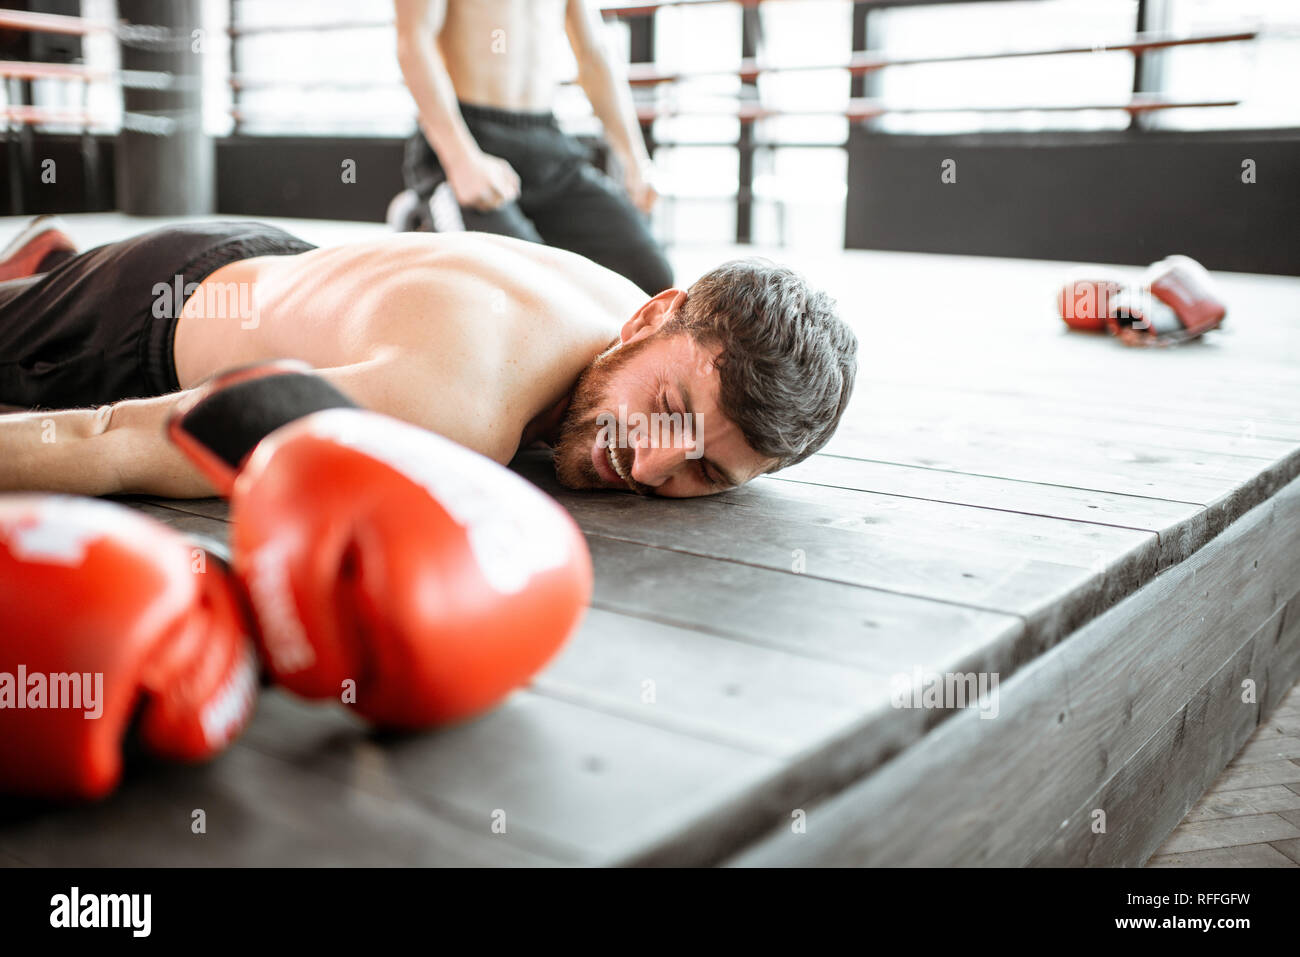 Pretty Female Boxer Knocked Out Laying On The Floor Stock Photo